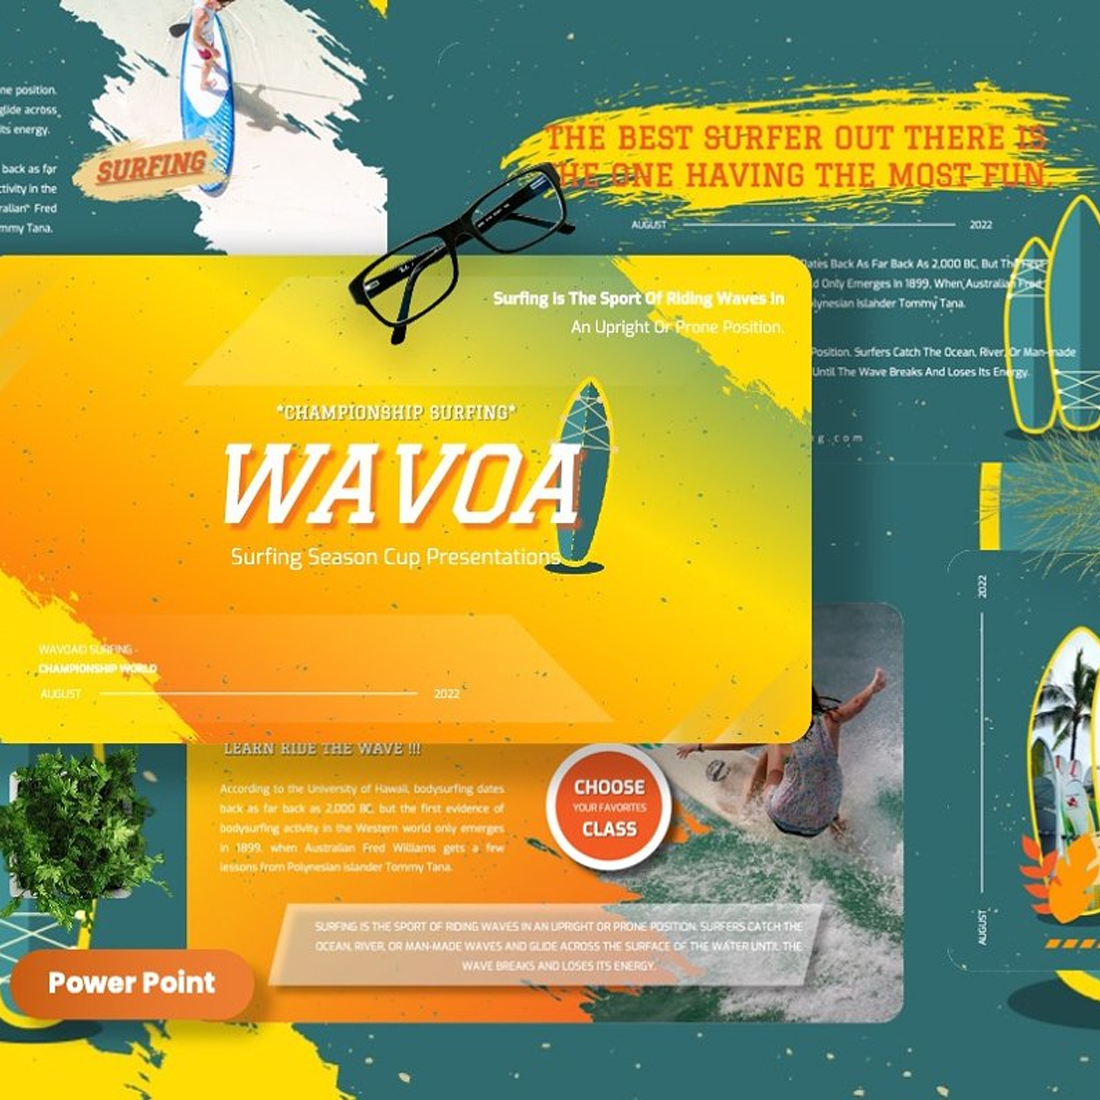 Images preview wavoa surfing sport powerpoint.